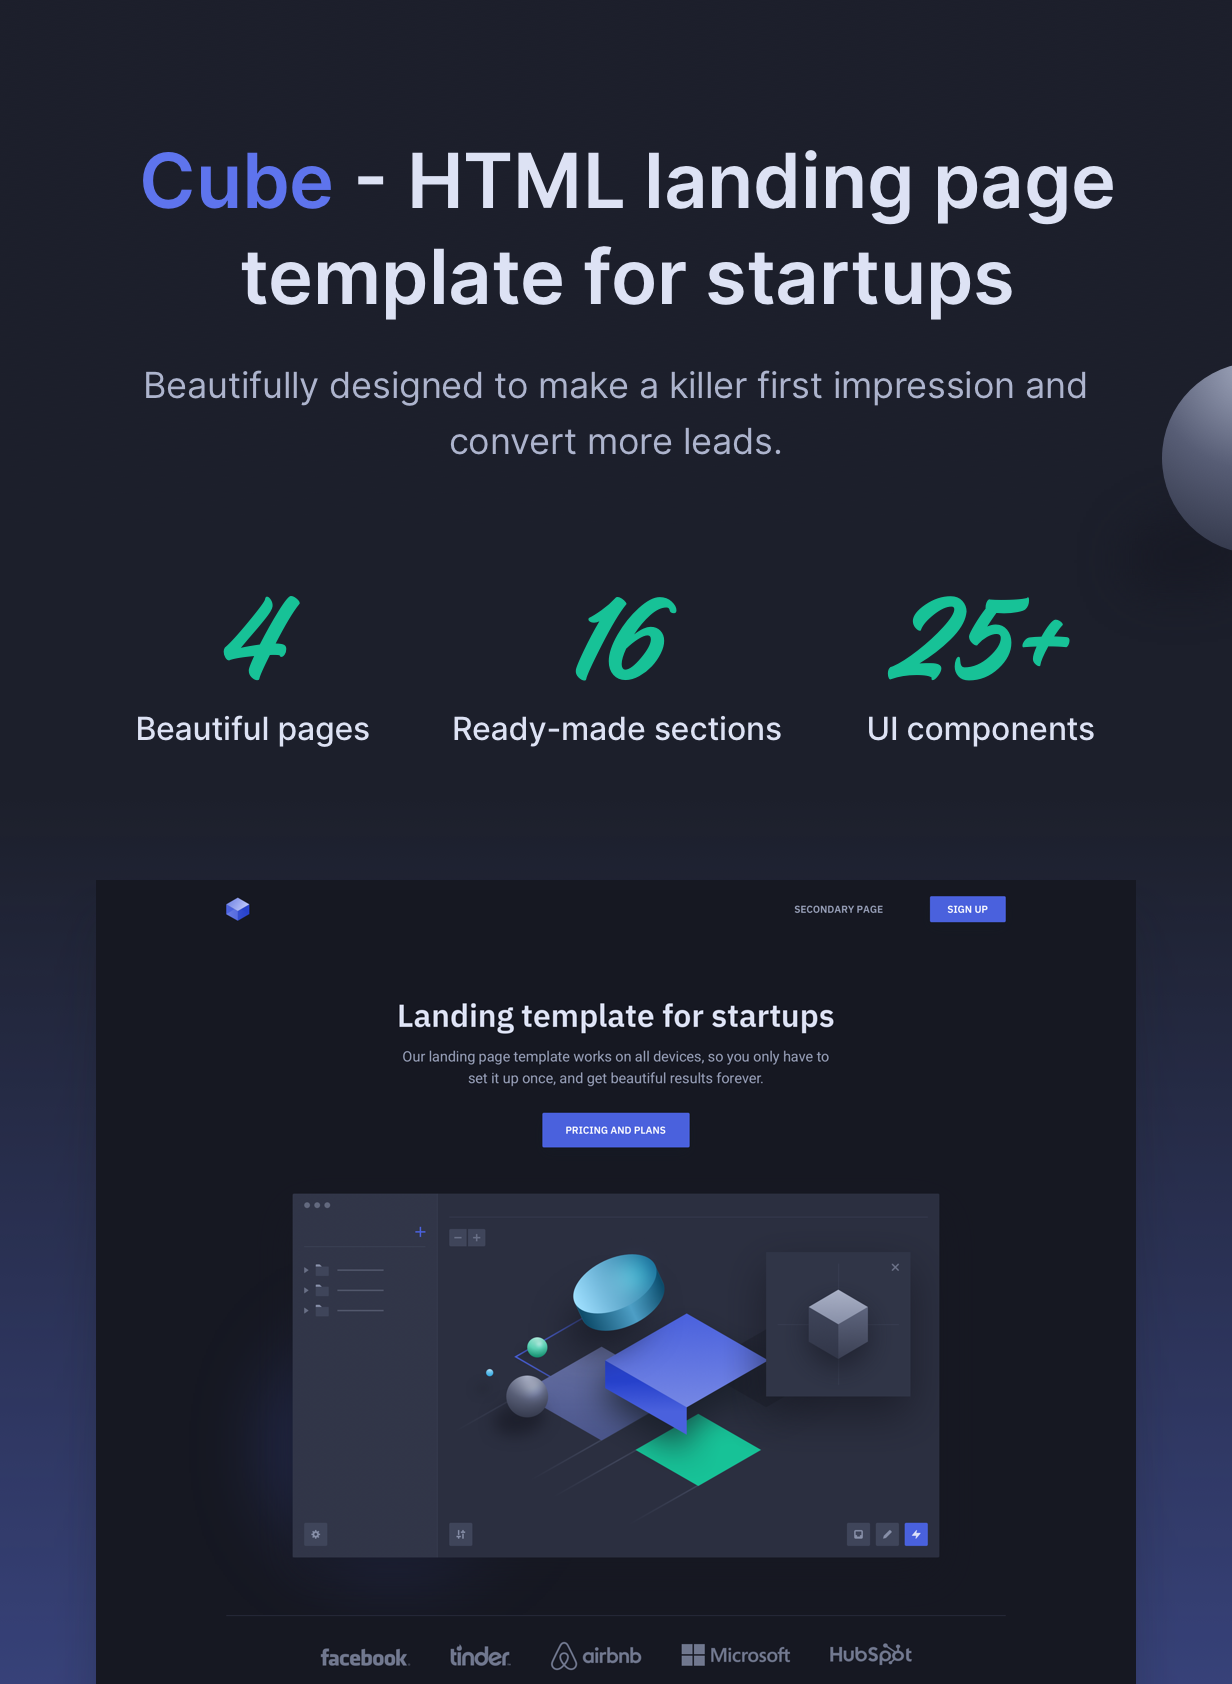 Cube - HTML landing page template for startups - 1